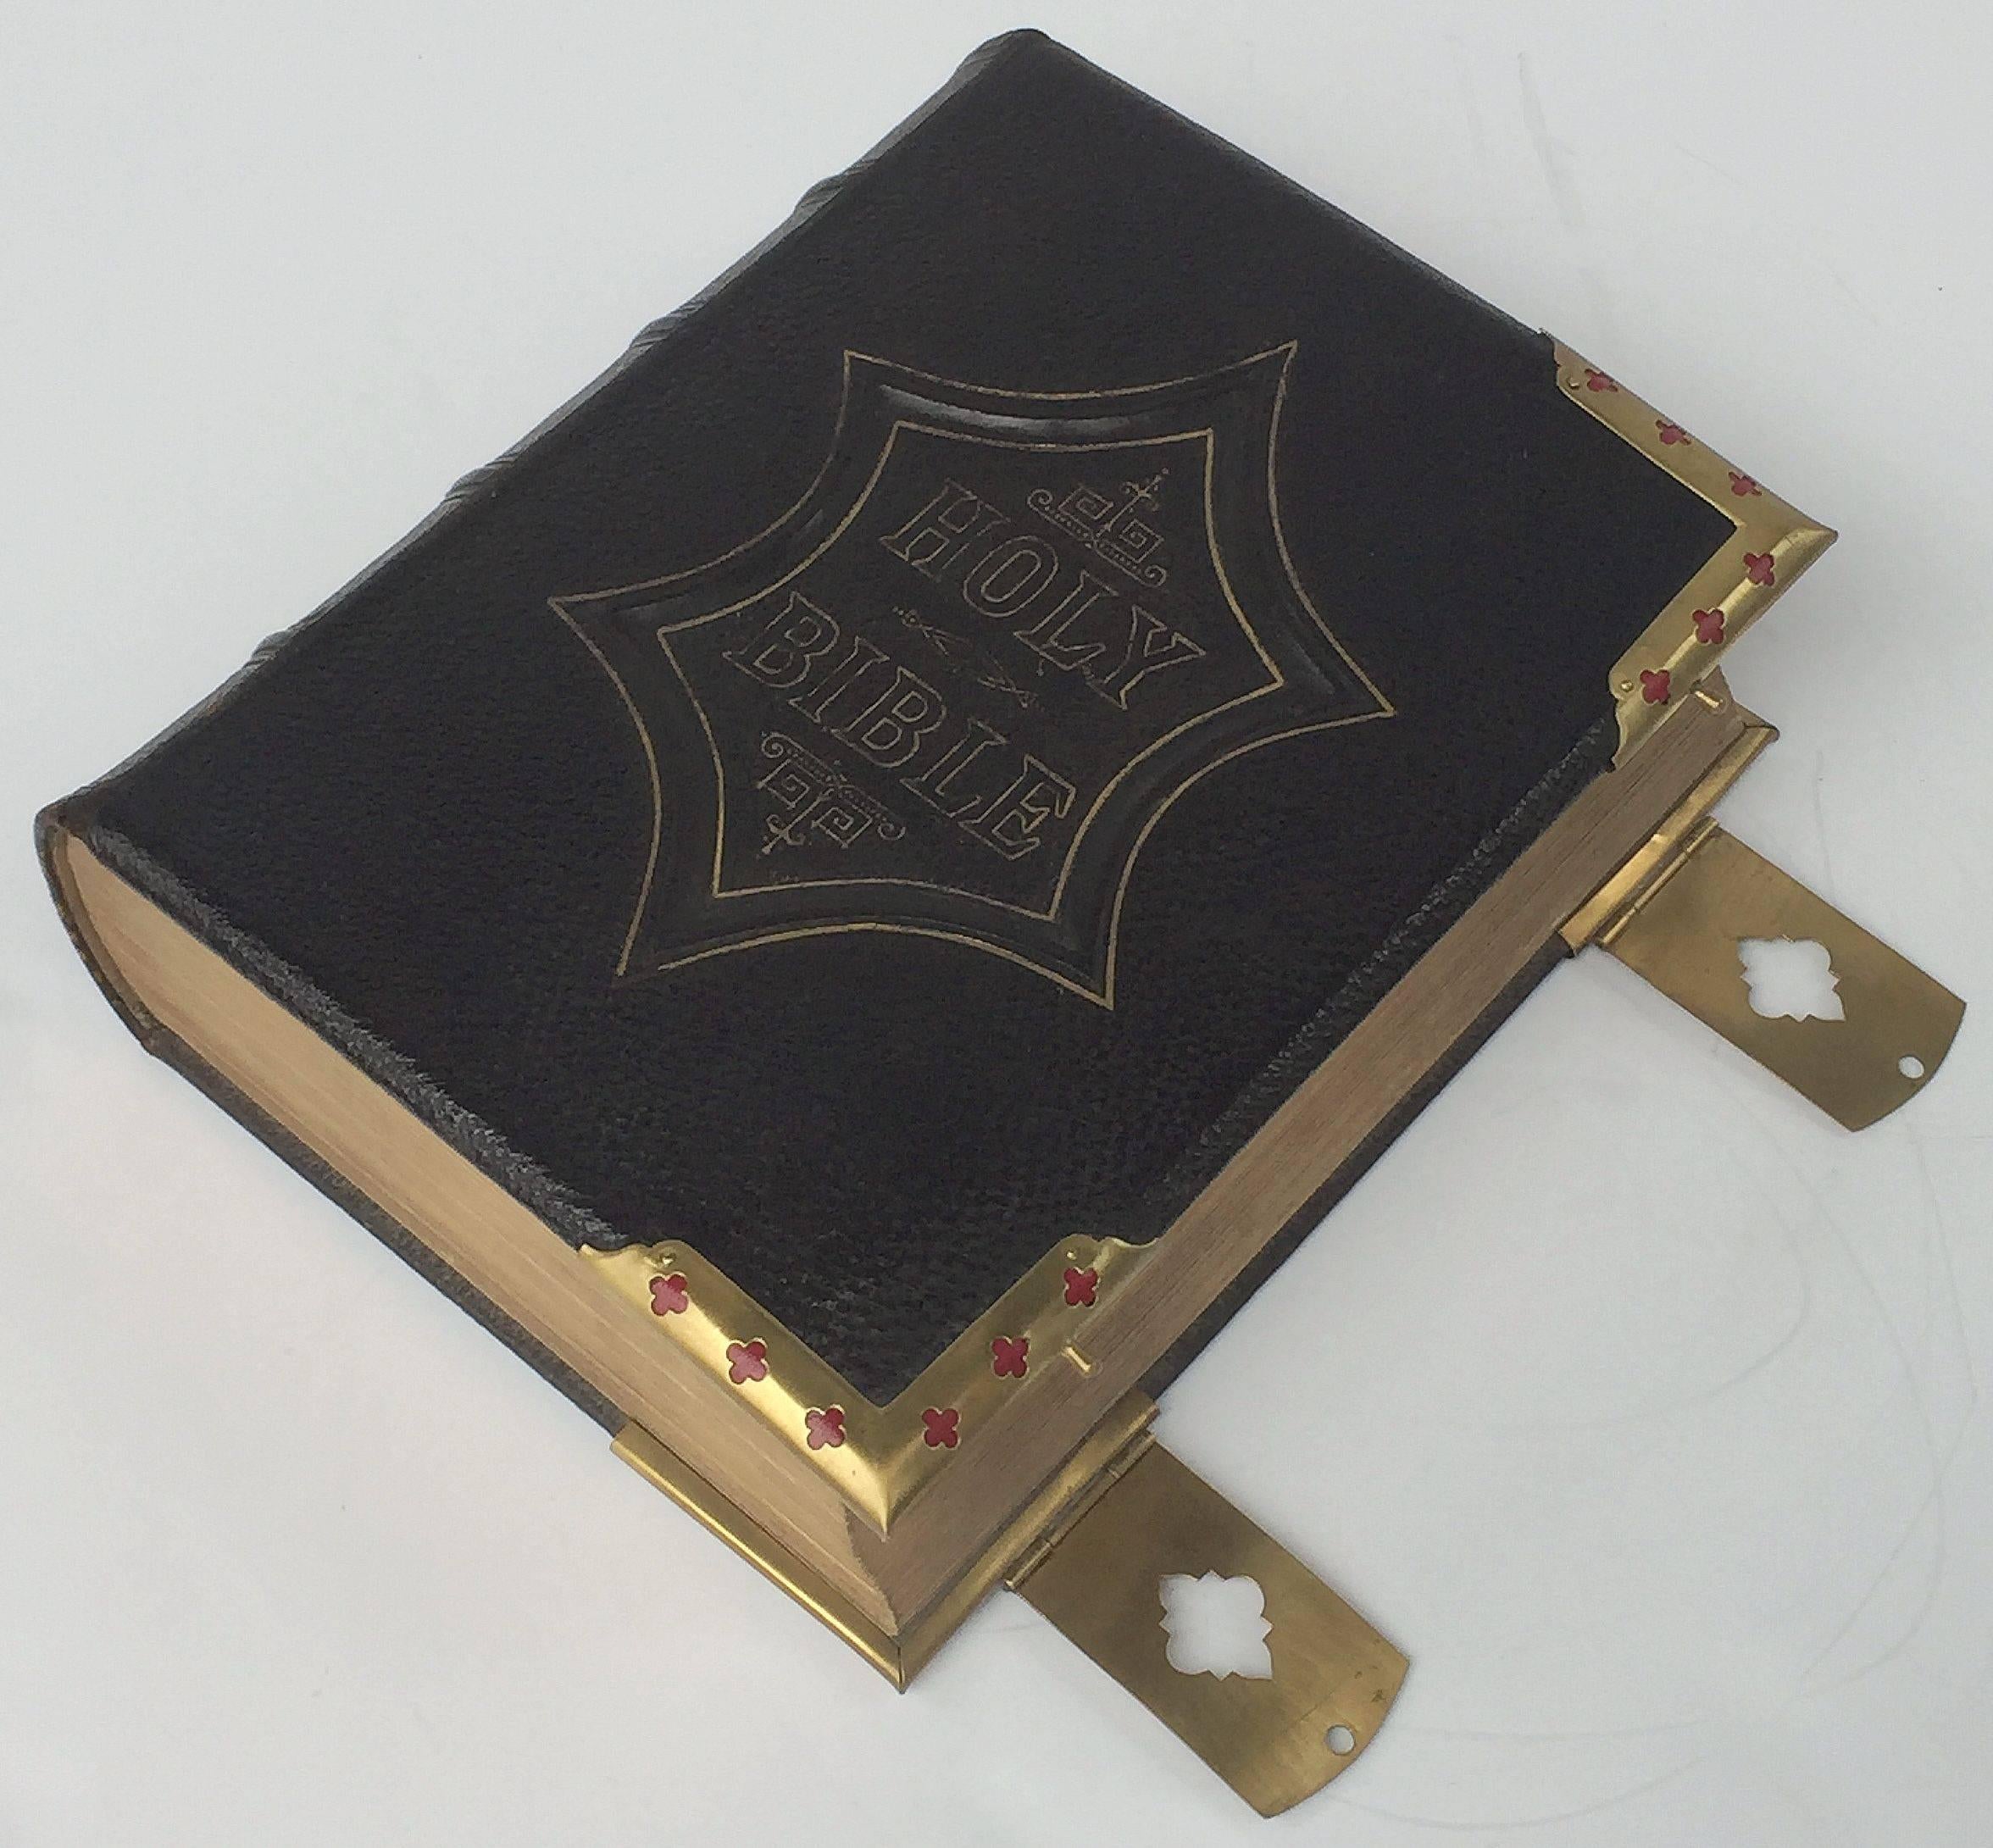 A fine 19th century holy bible published in England by Roberts and Co., 4 Eaton Street, Richmond, Surrey.

Block-titled “The national comprehensive family bible - The holy bible with the commentaries of Scott and Henry

Featuring many sepia and